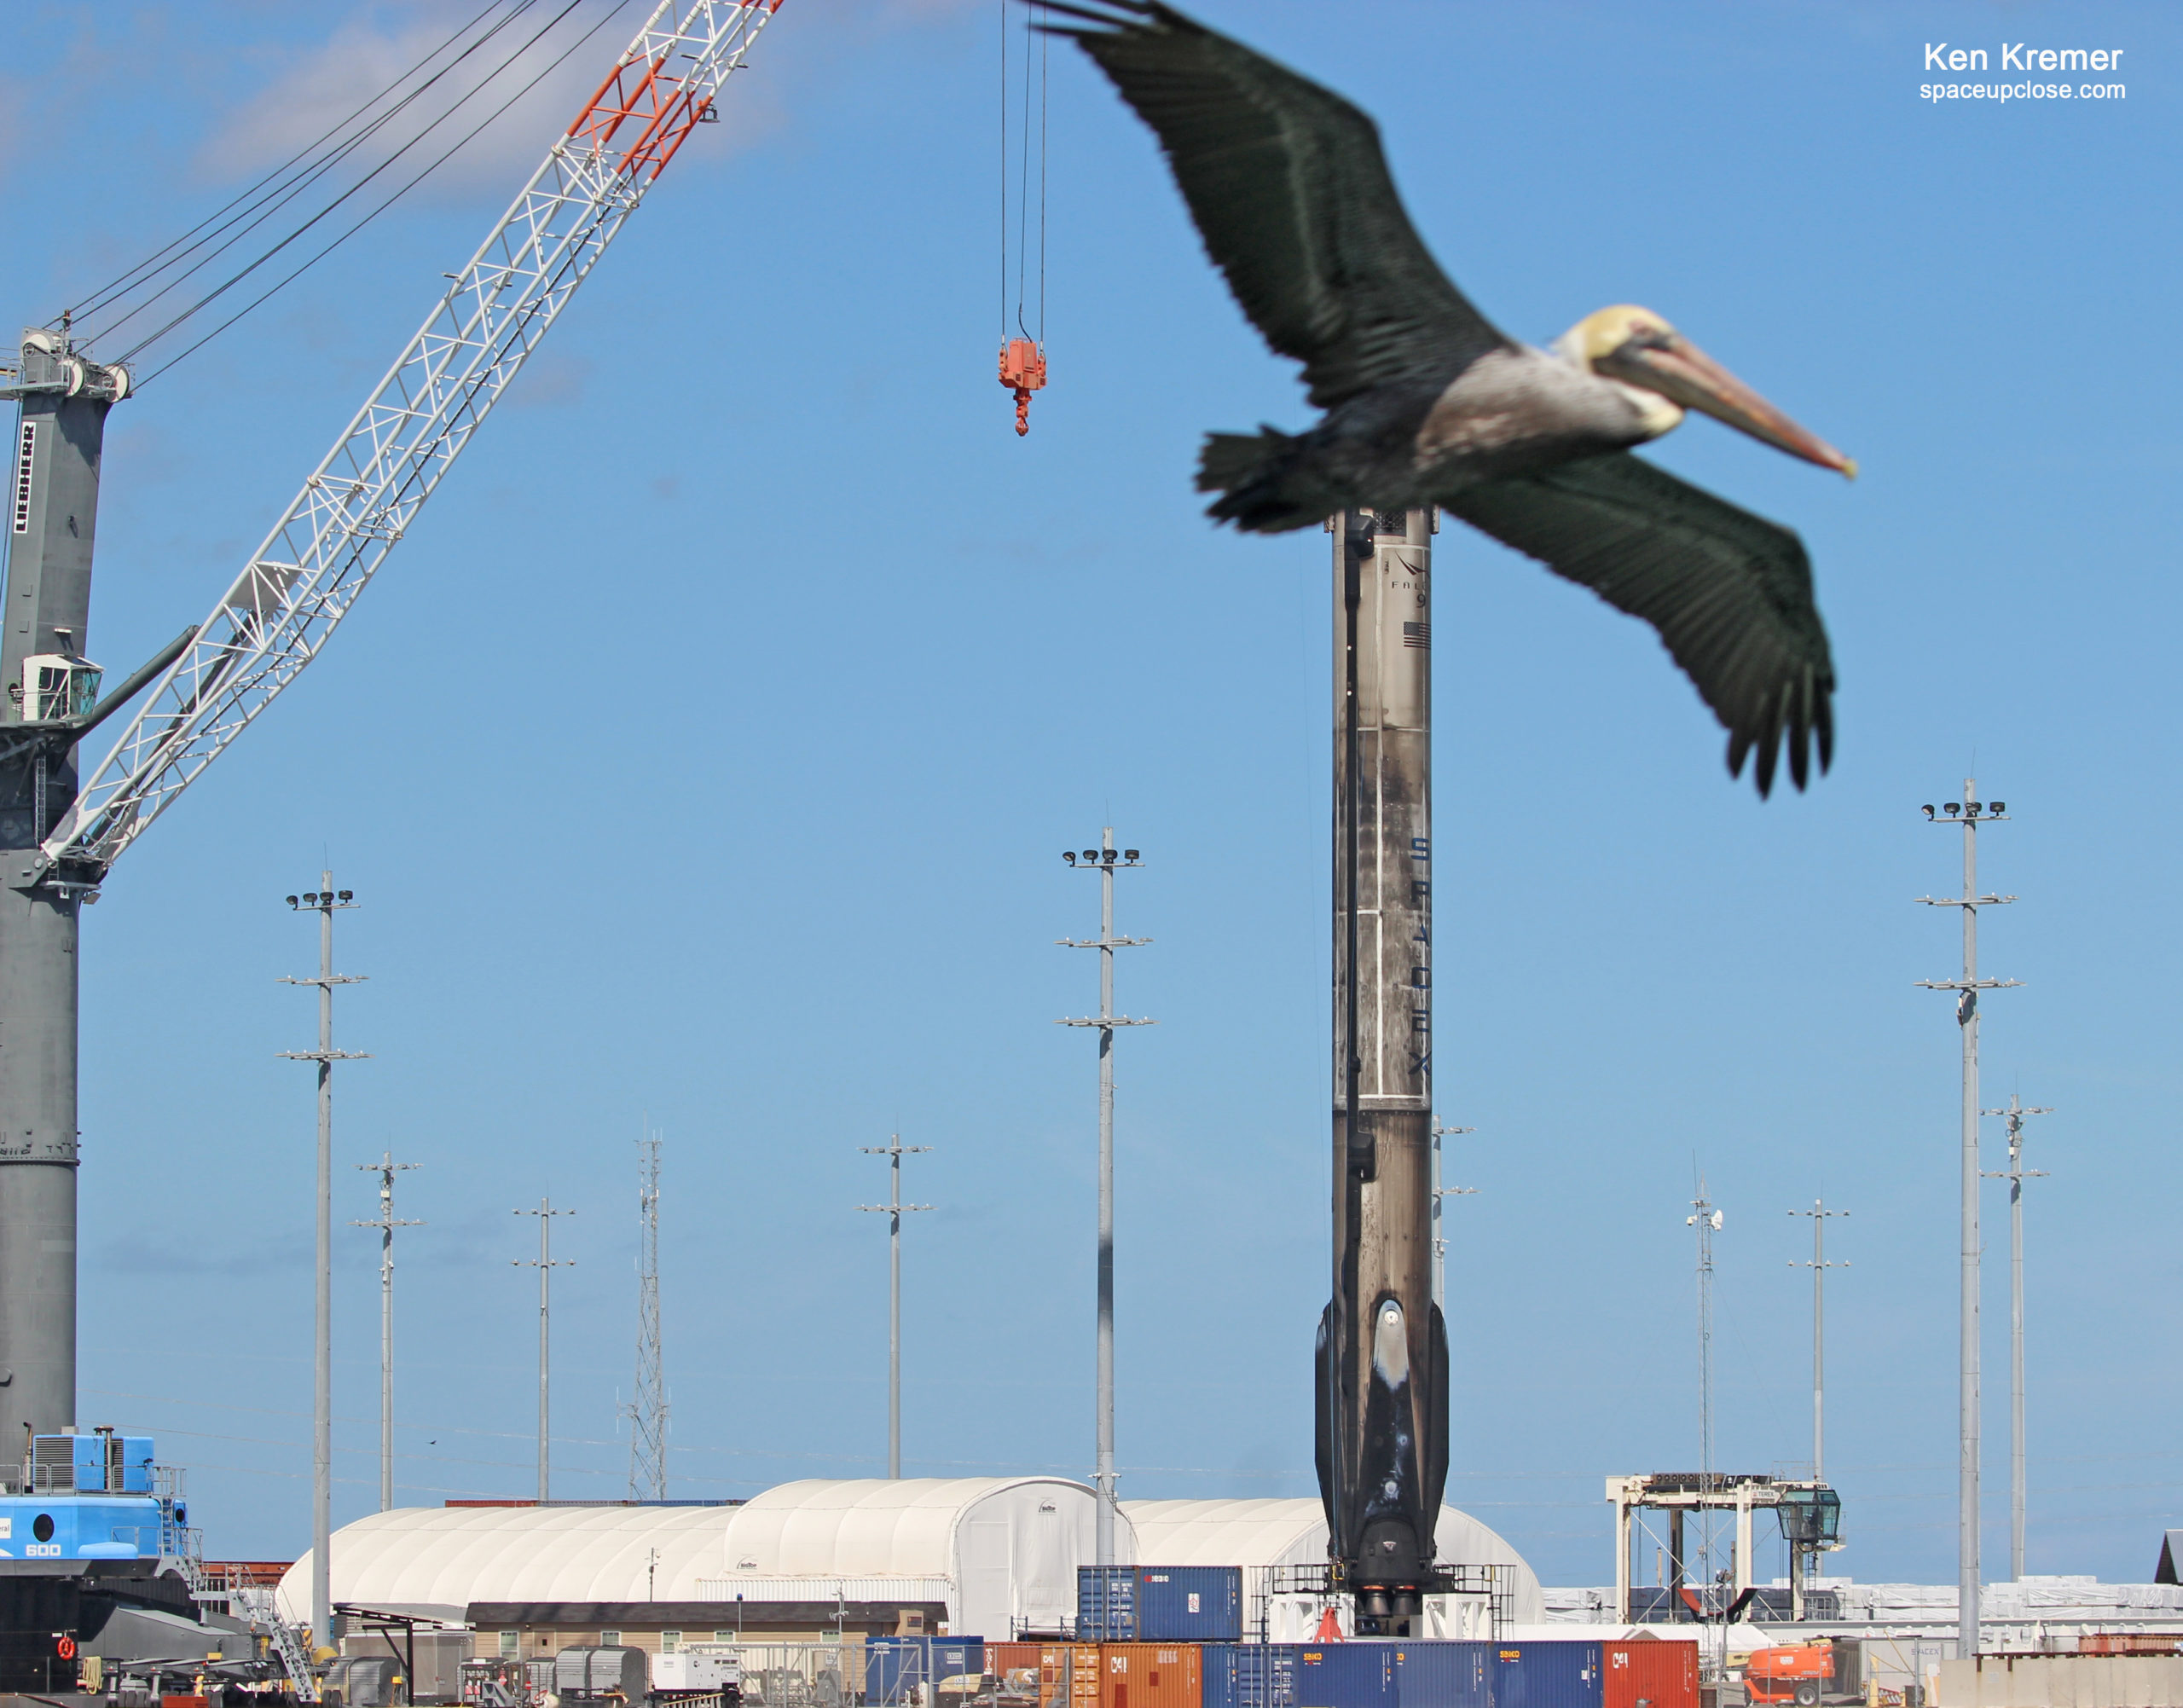 Picturesque Pelicans Patrol SpaceX Recovered Falcon 9 Booster Sailed into Port Canaveral: Photos